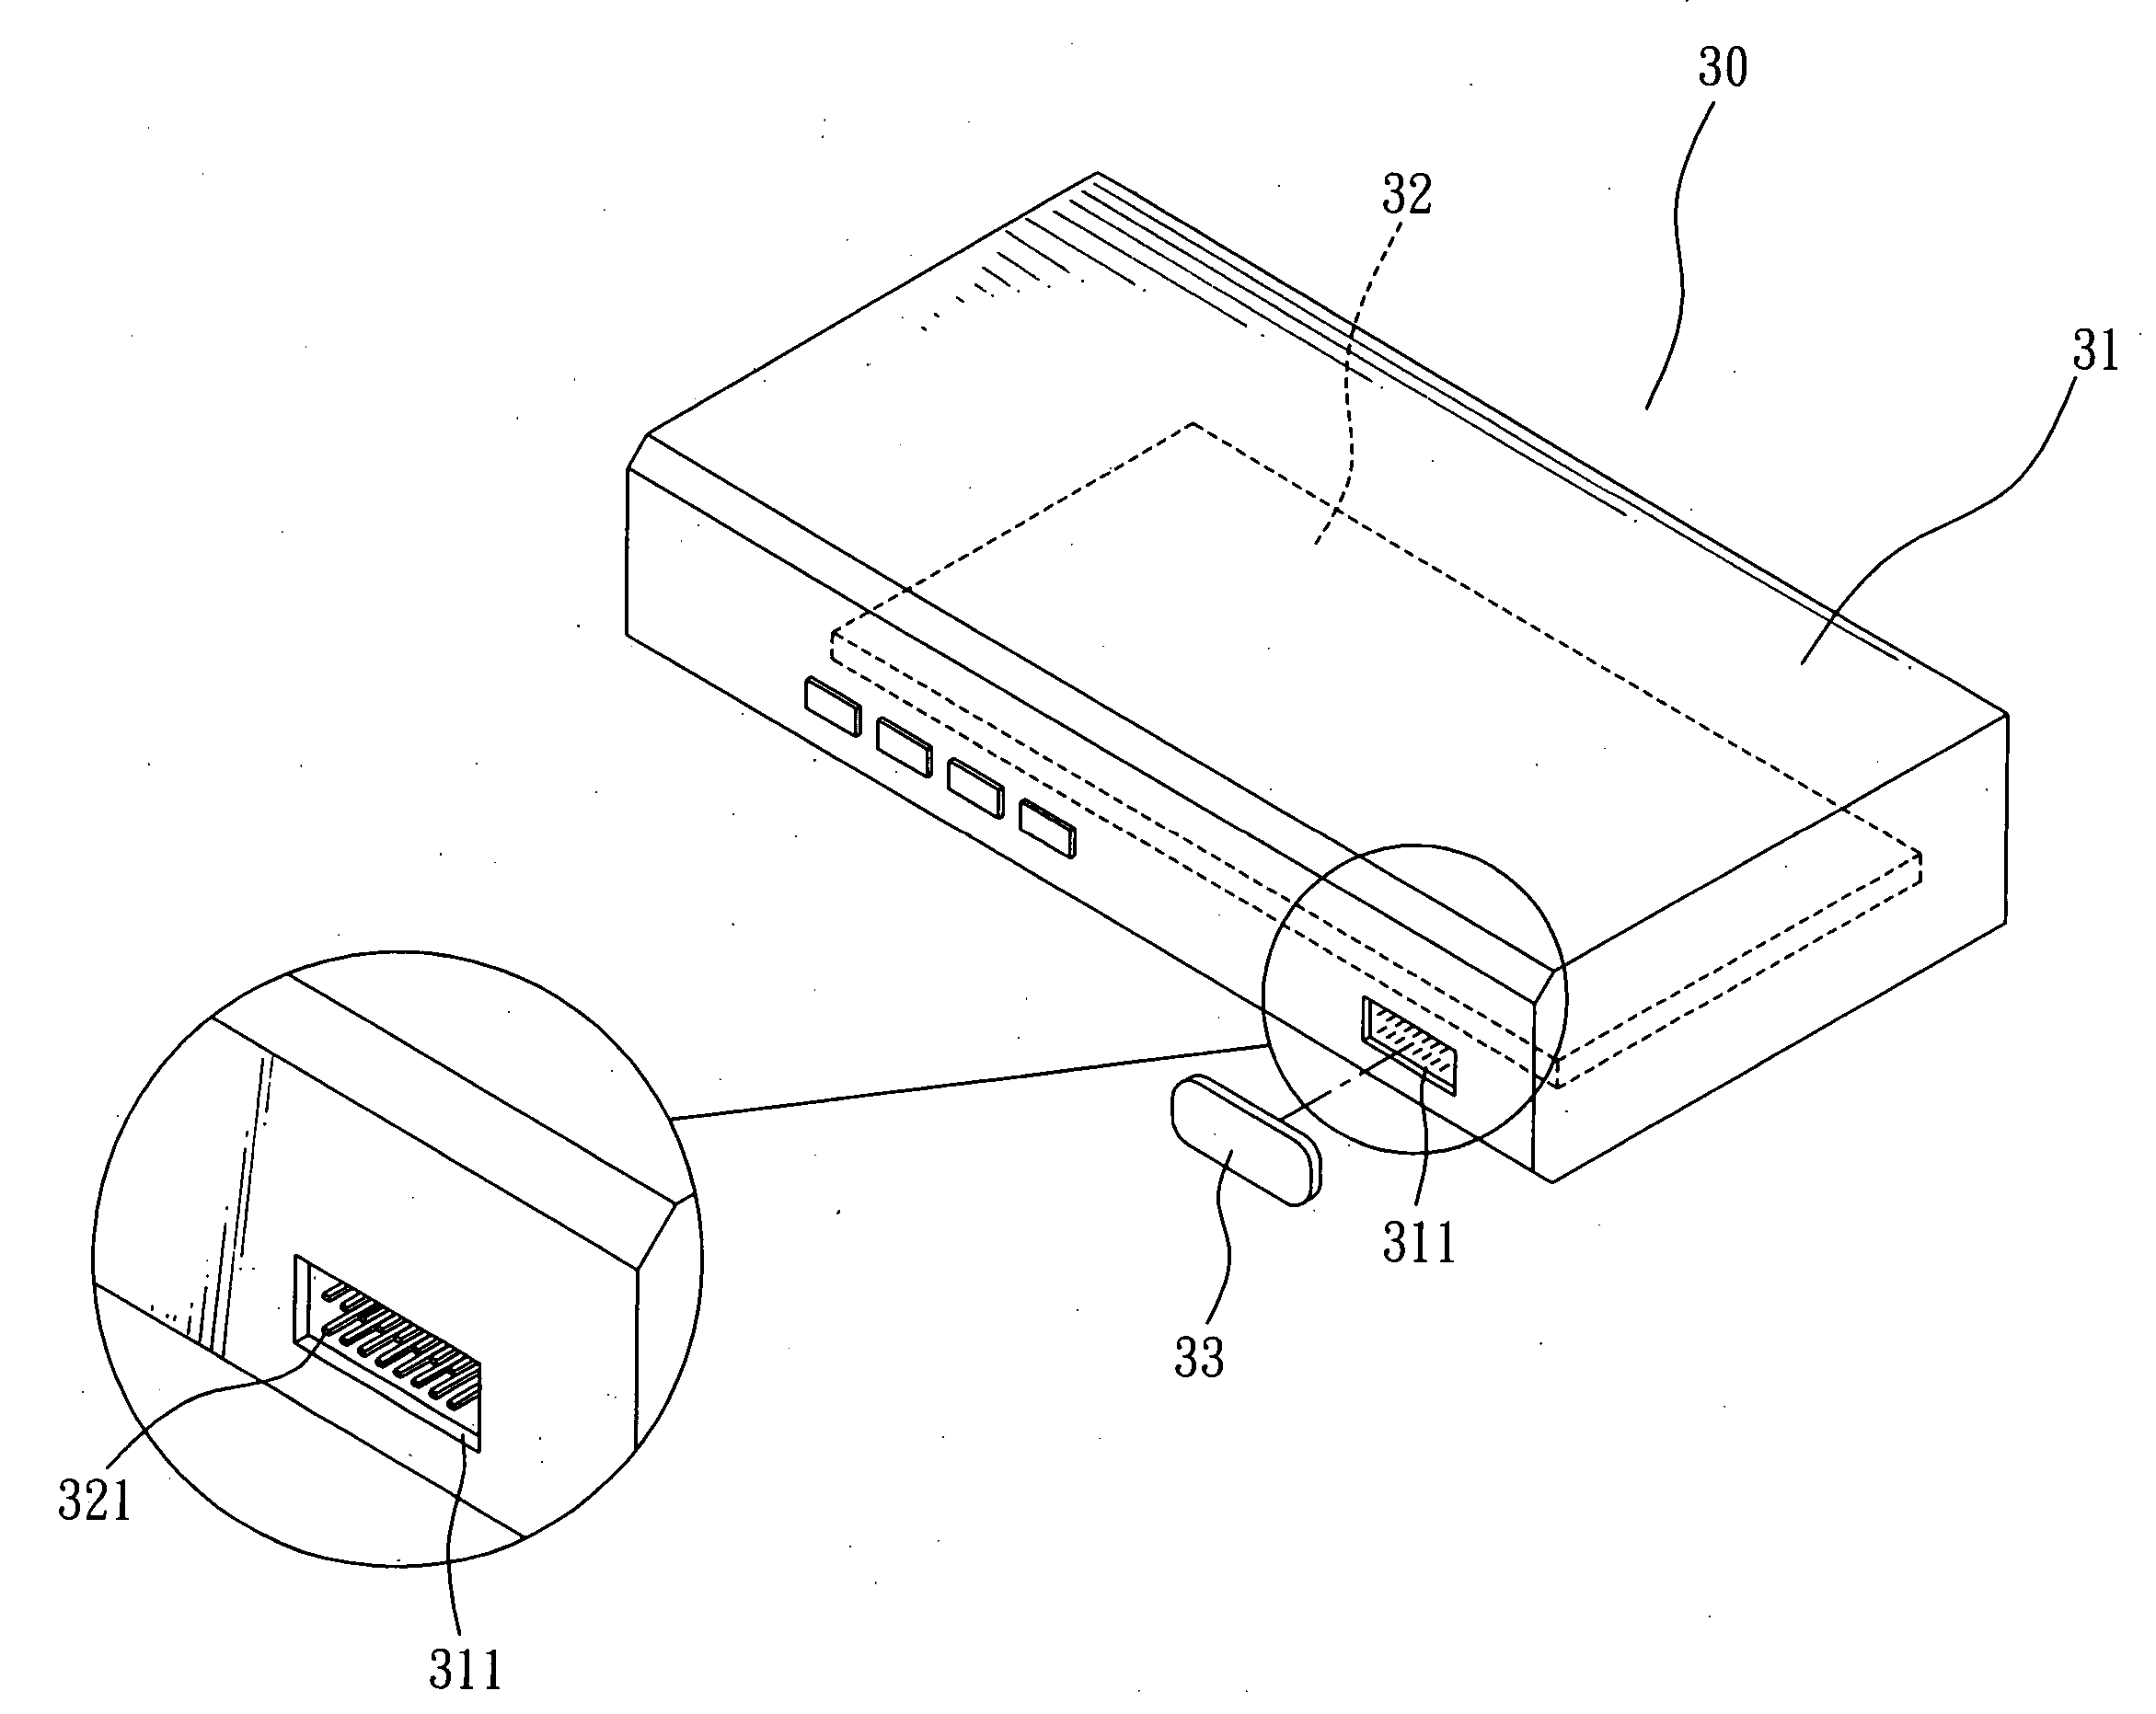 Bidirectional convertible KVM switch assembly structure and its KVM switch